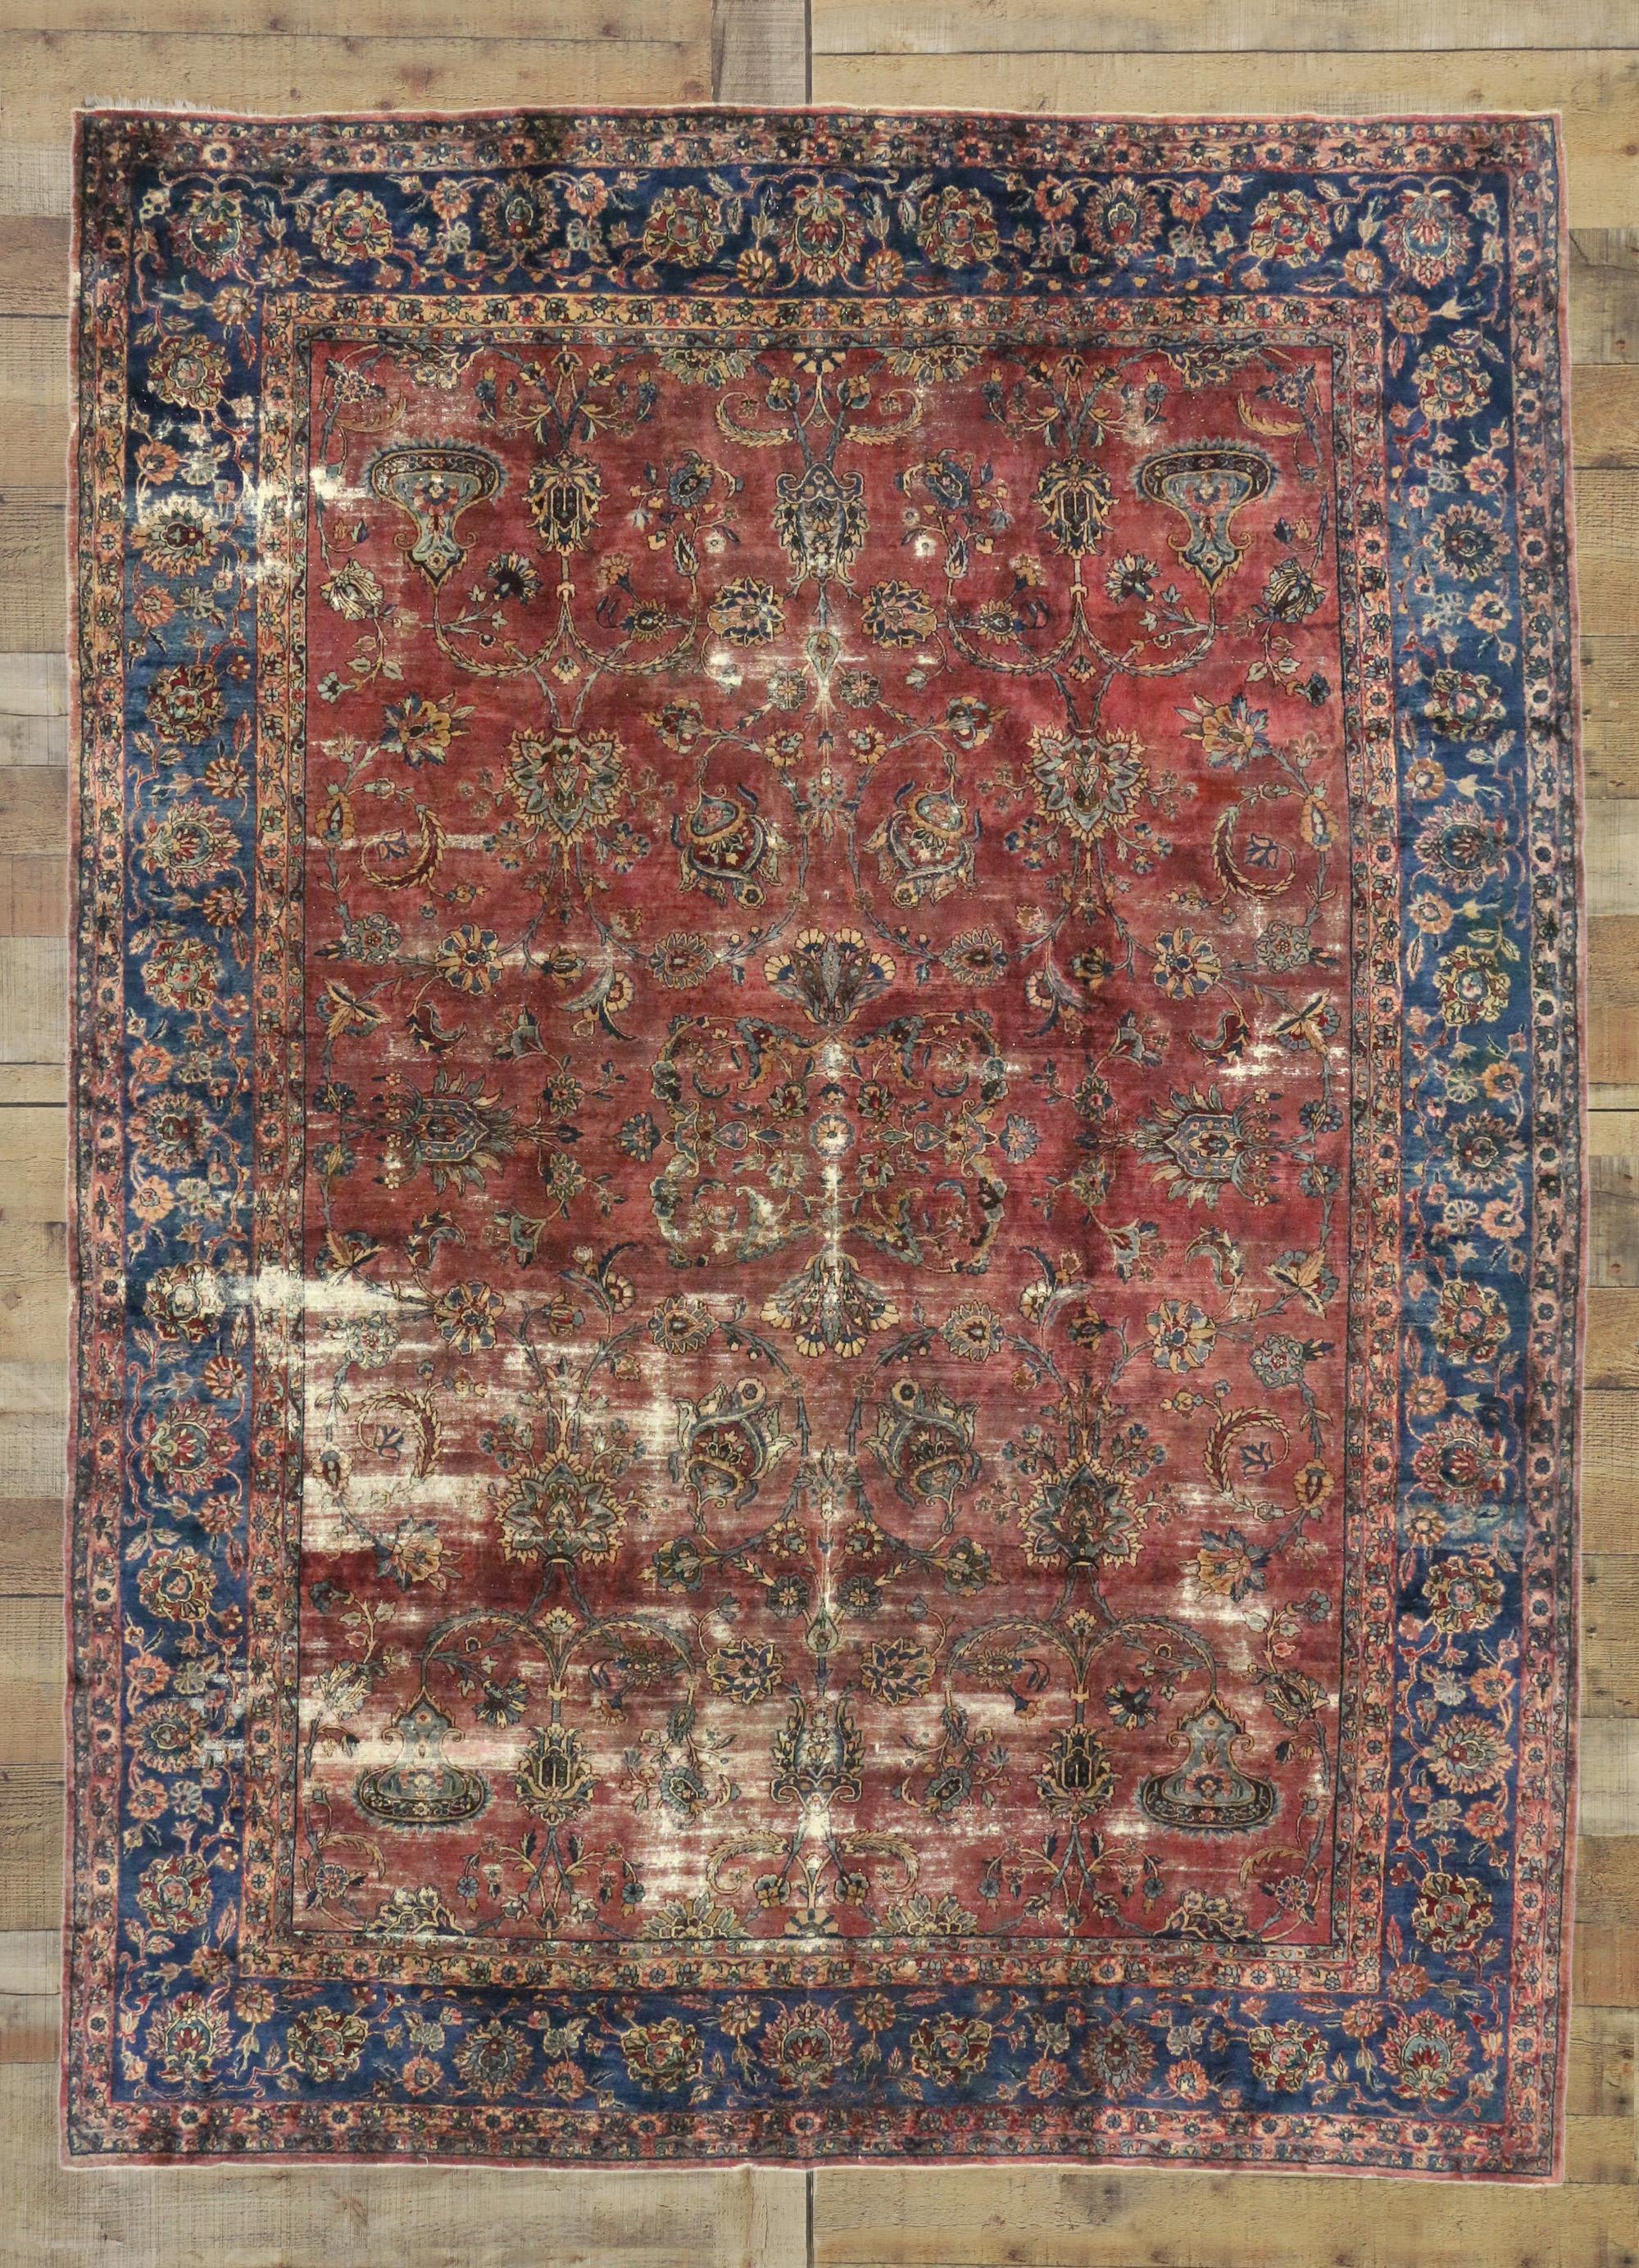 Distressed Antique Persian Kerman Rug with New England Cape Cod Style In Distressed Condition For Sale In Dallas, TX